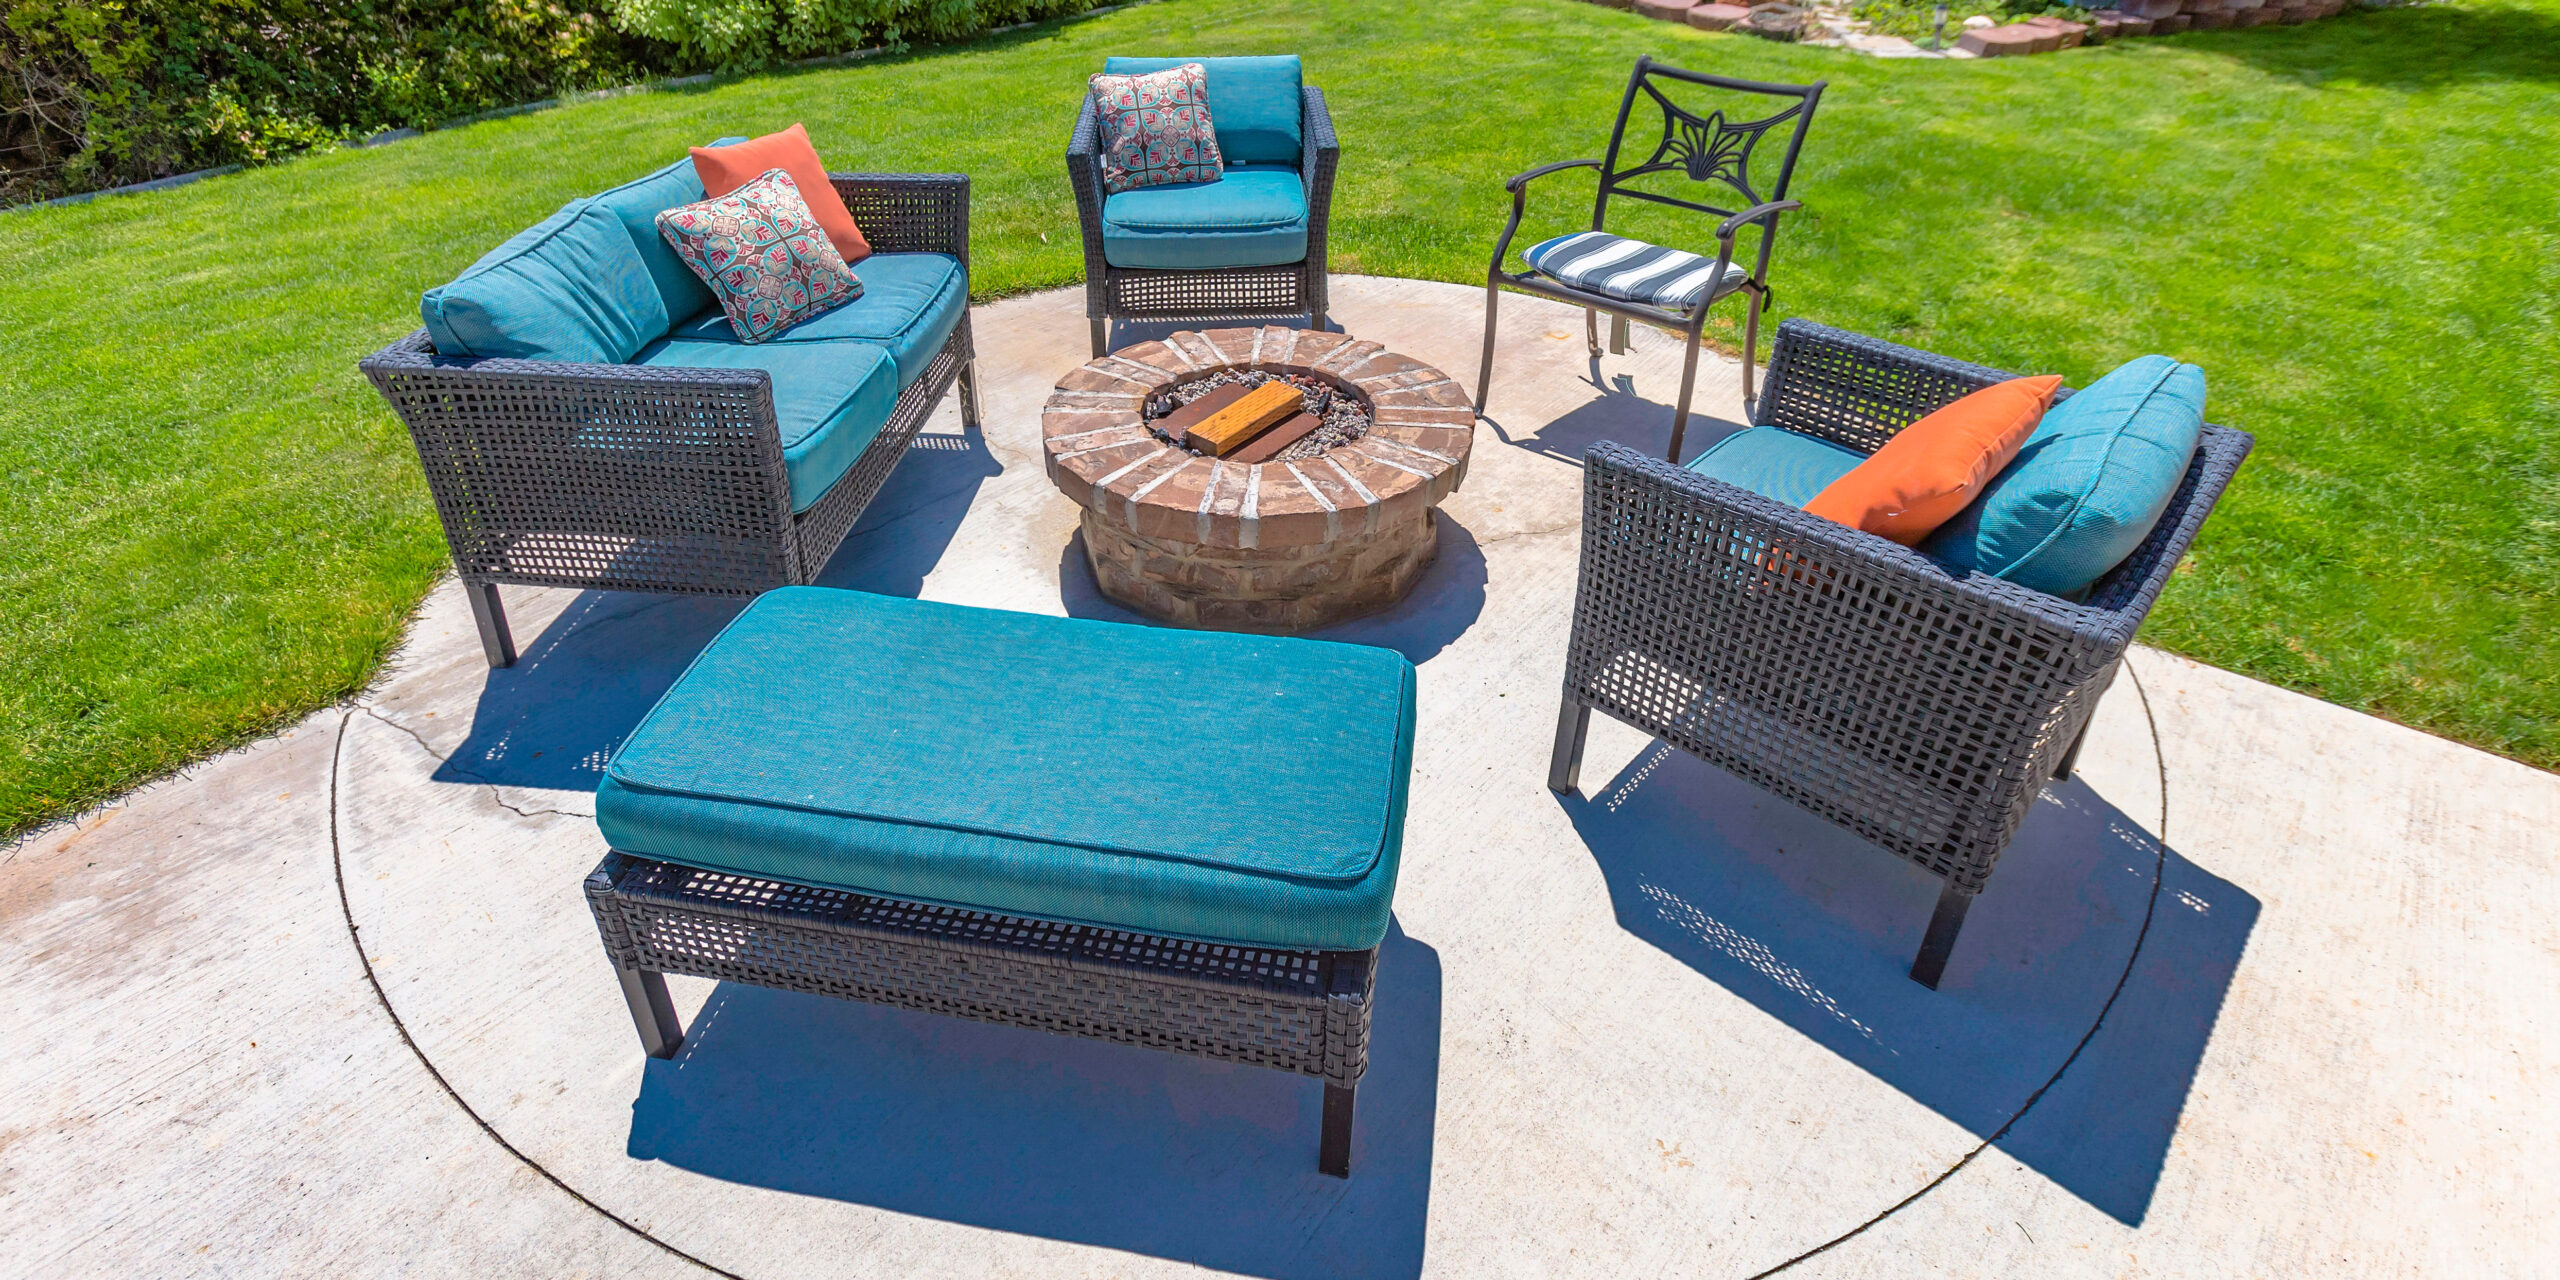 Circular fire pit and chairs on a sunny backyard